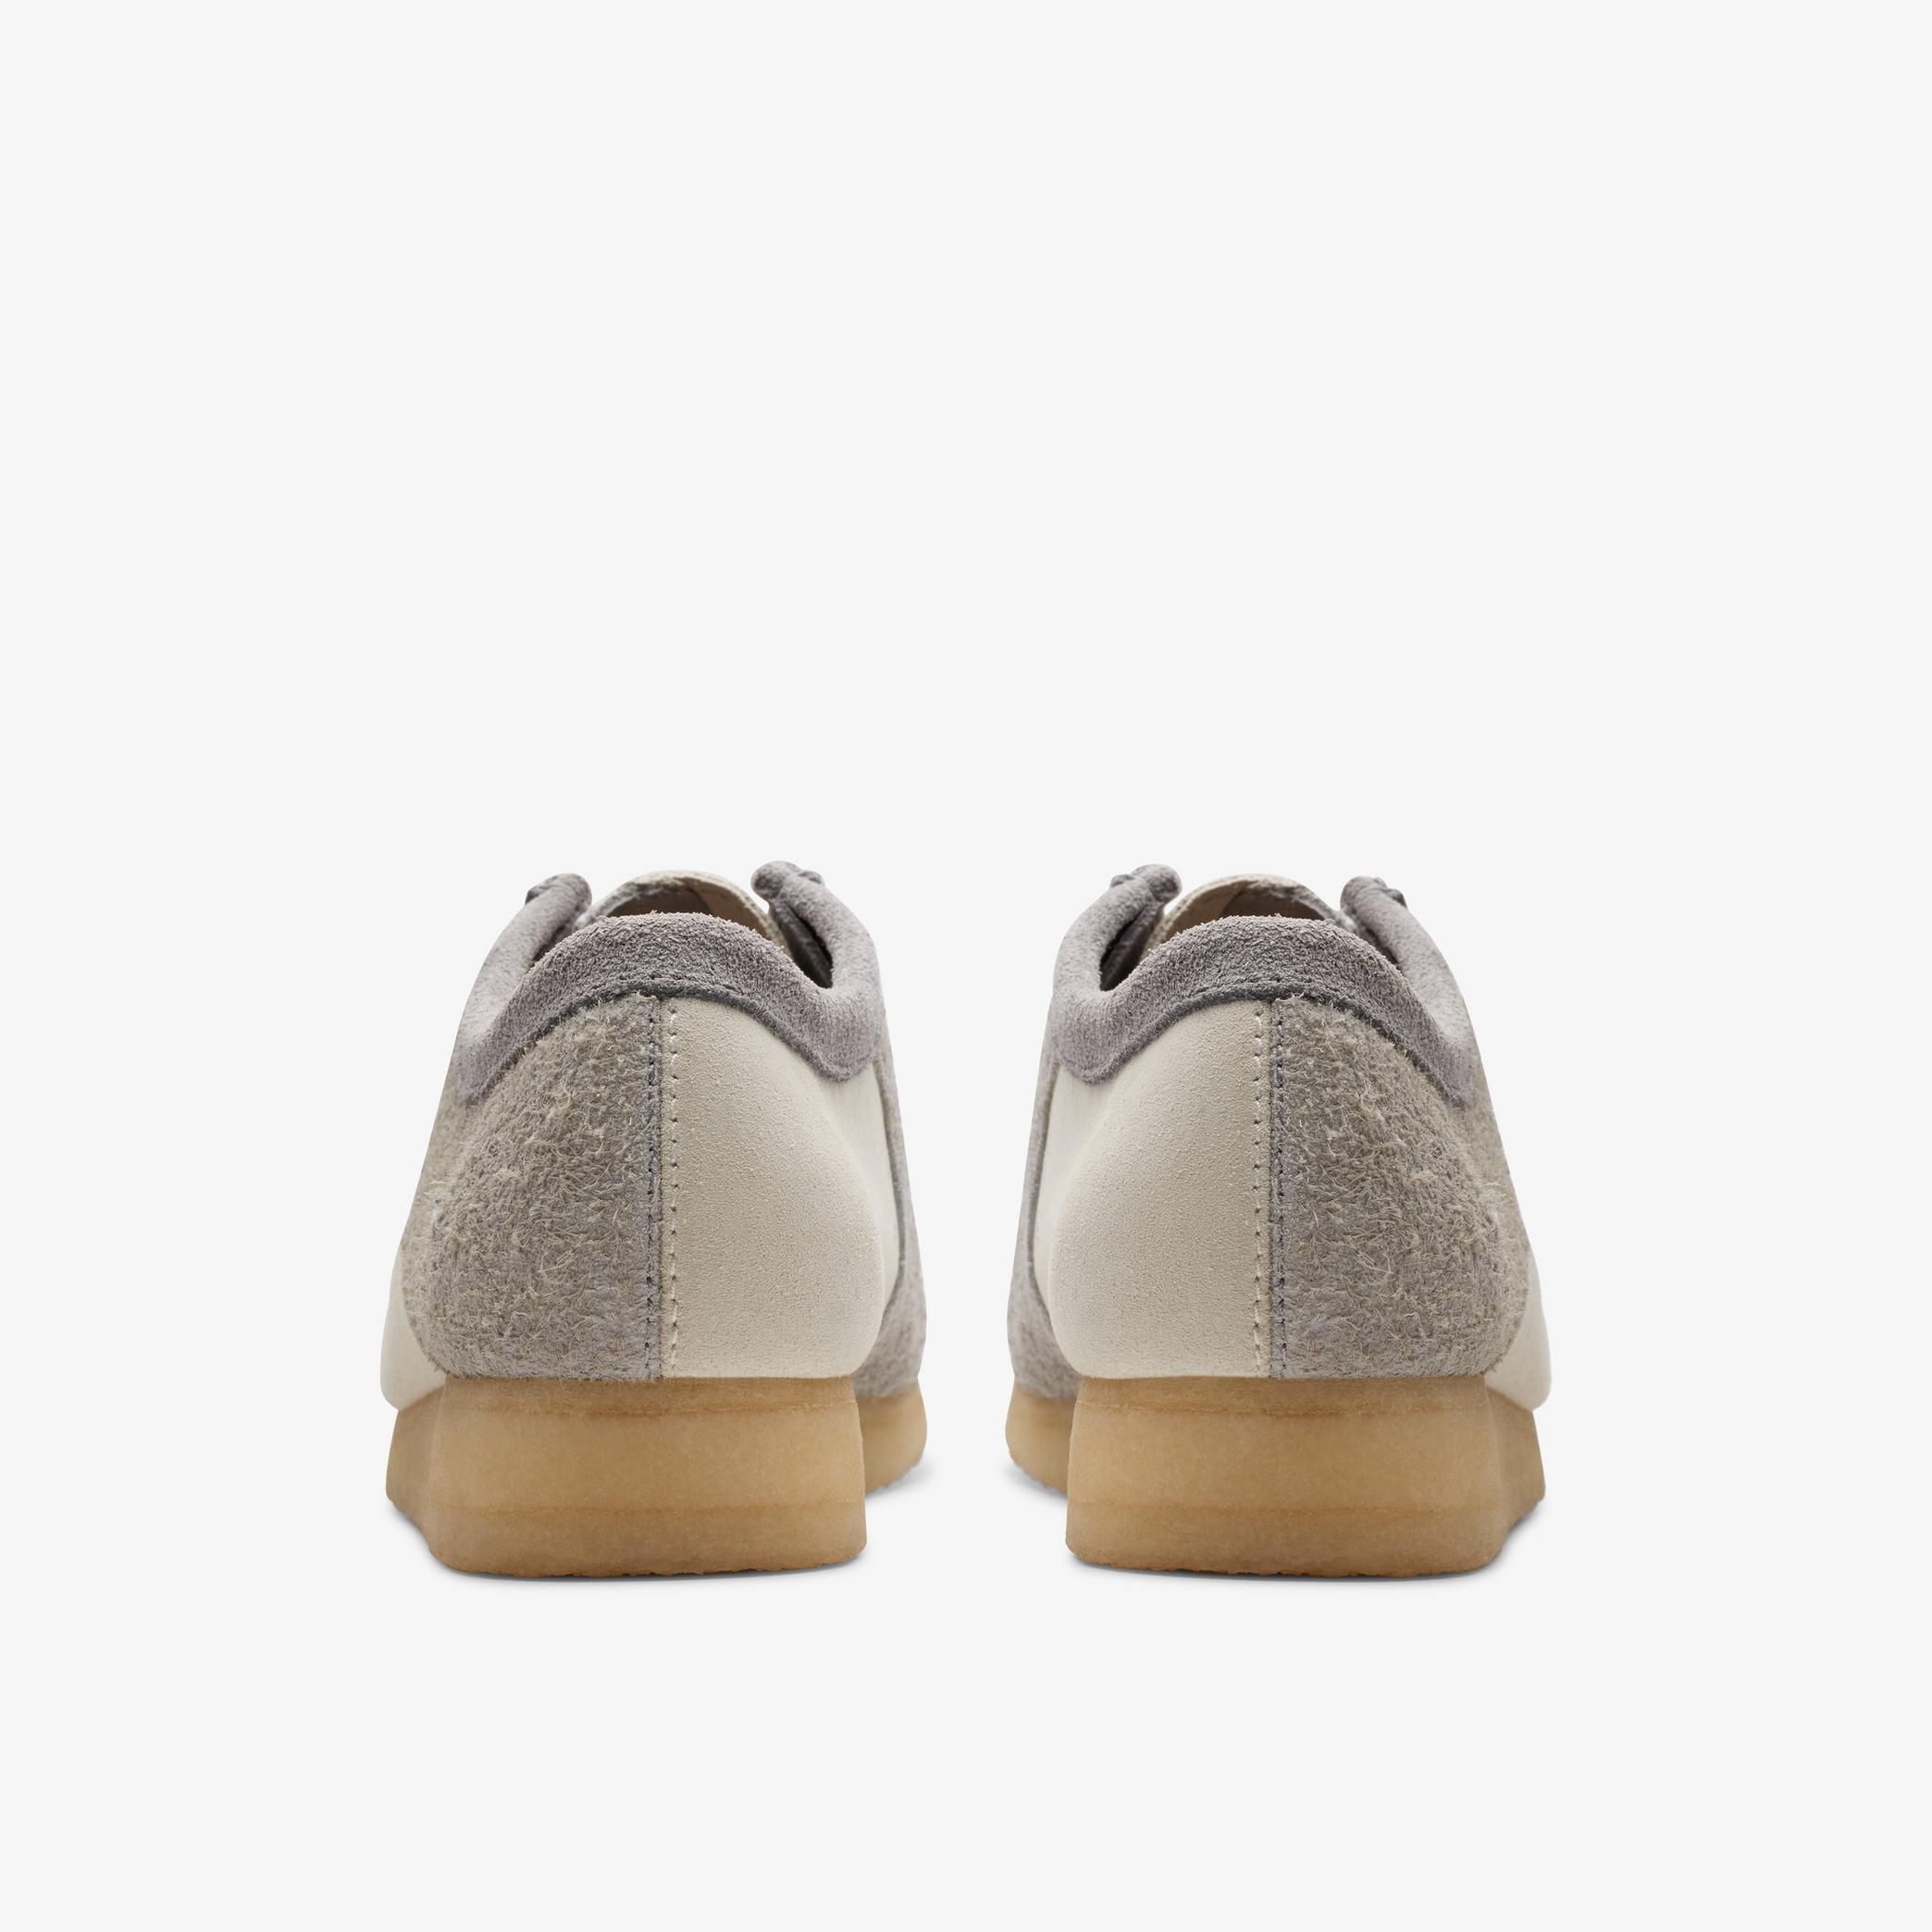 Wallabee Grey/Off White Wallabee, view 5 of 7